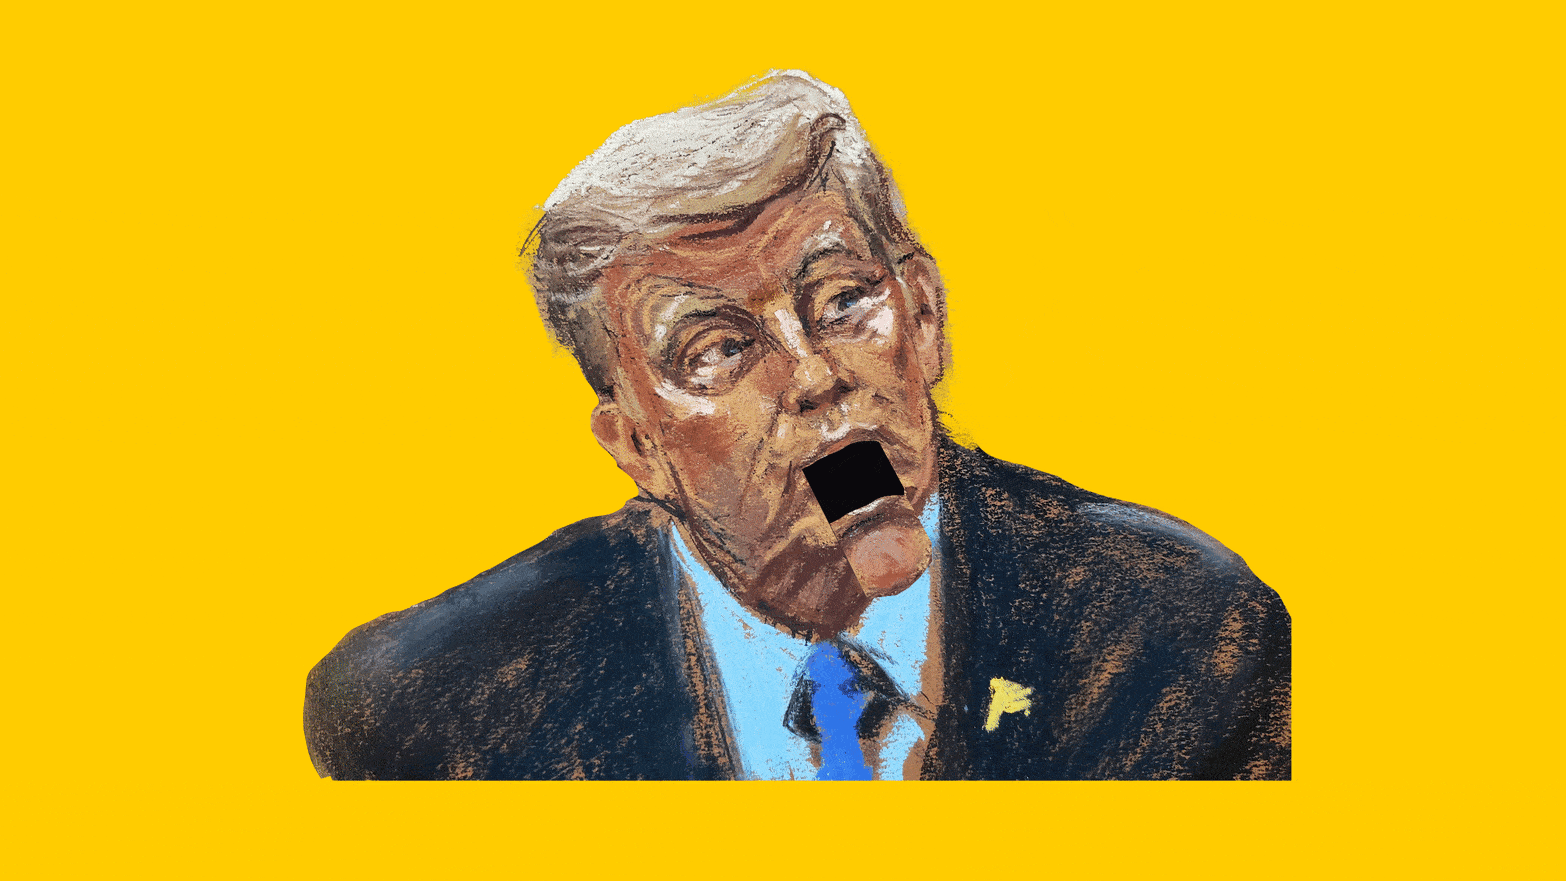 Illustrated gif of a courtroom sketch of Donald Trump with his mouth opening and shutting